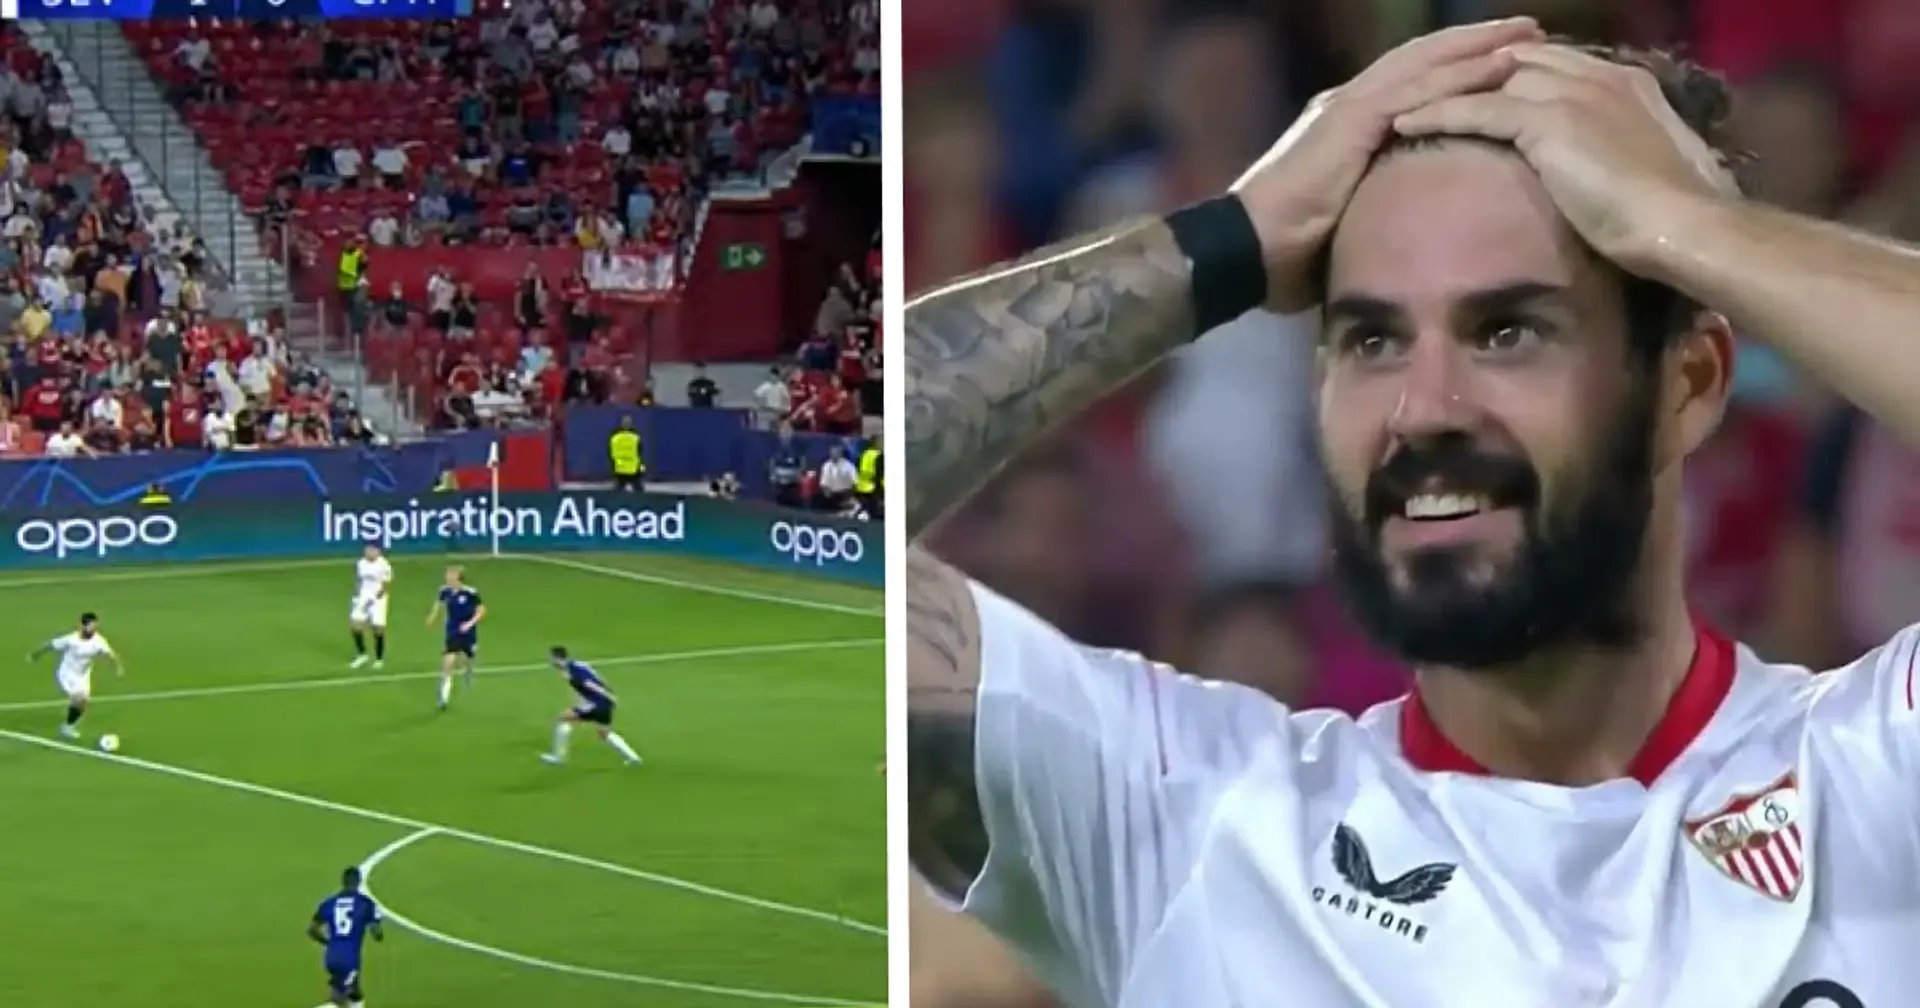 Isco scores first-ever goal for Sevilla – it's really special